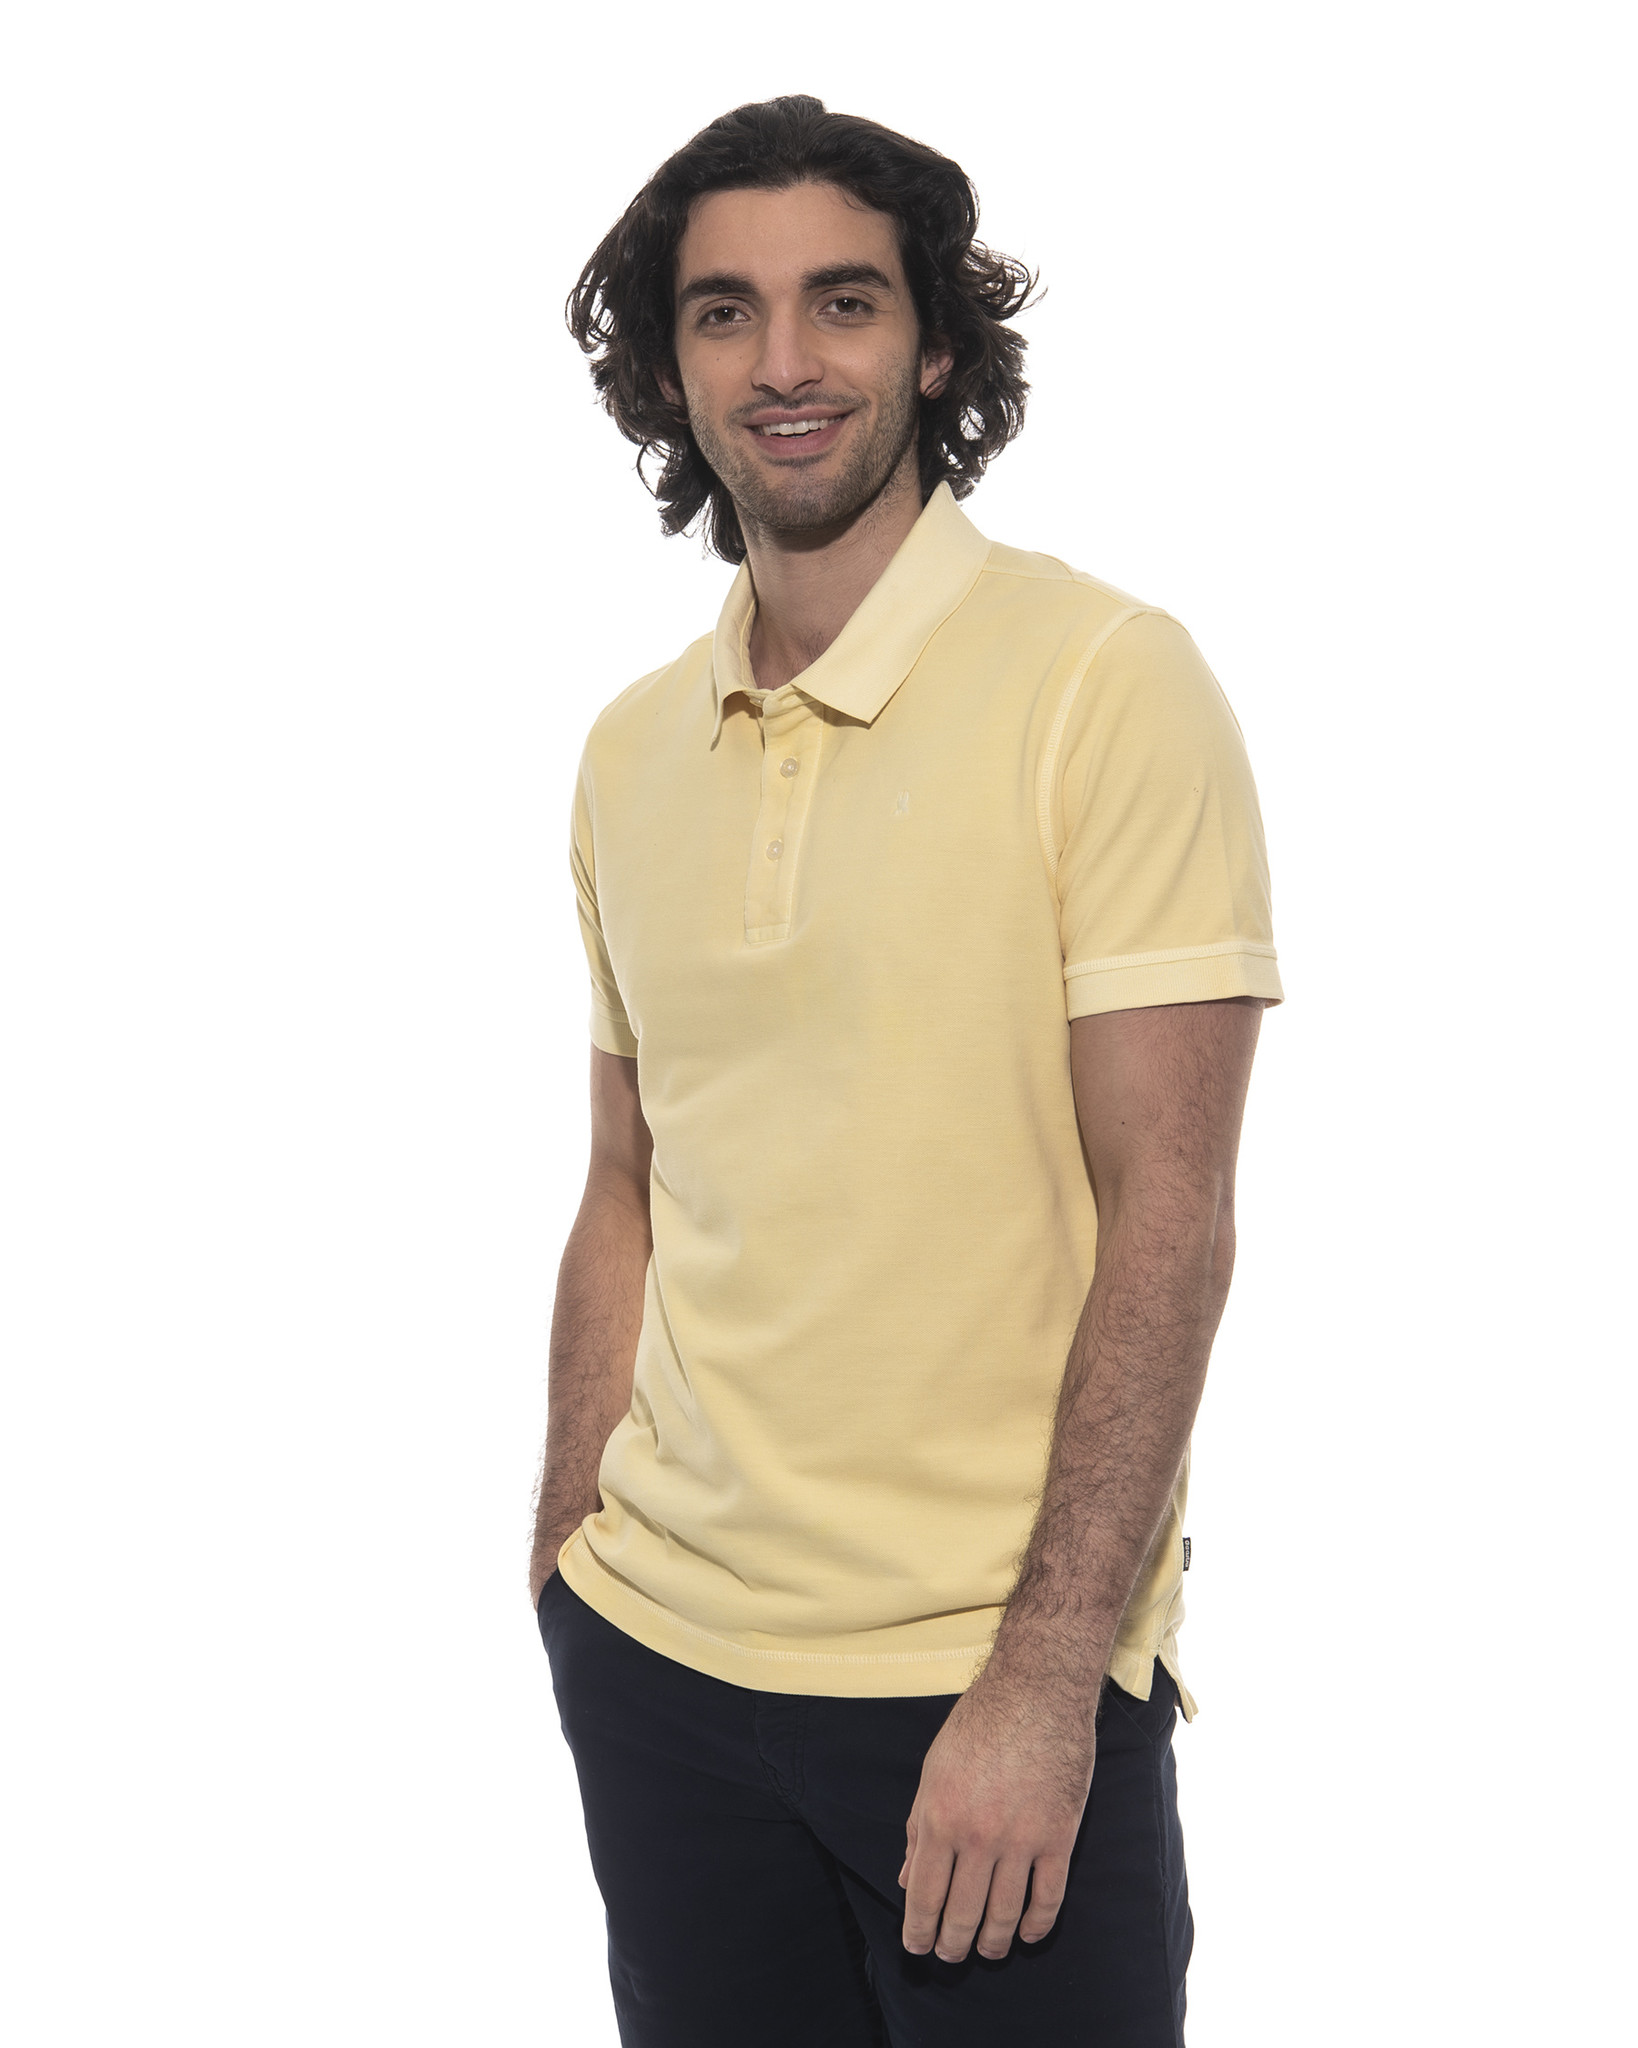 Polo Bright with garment dye